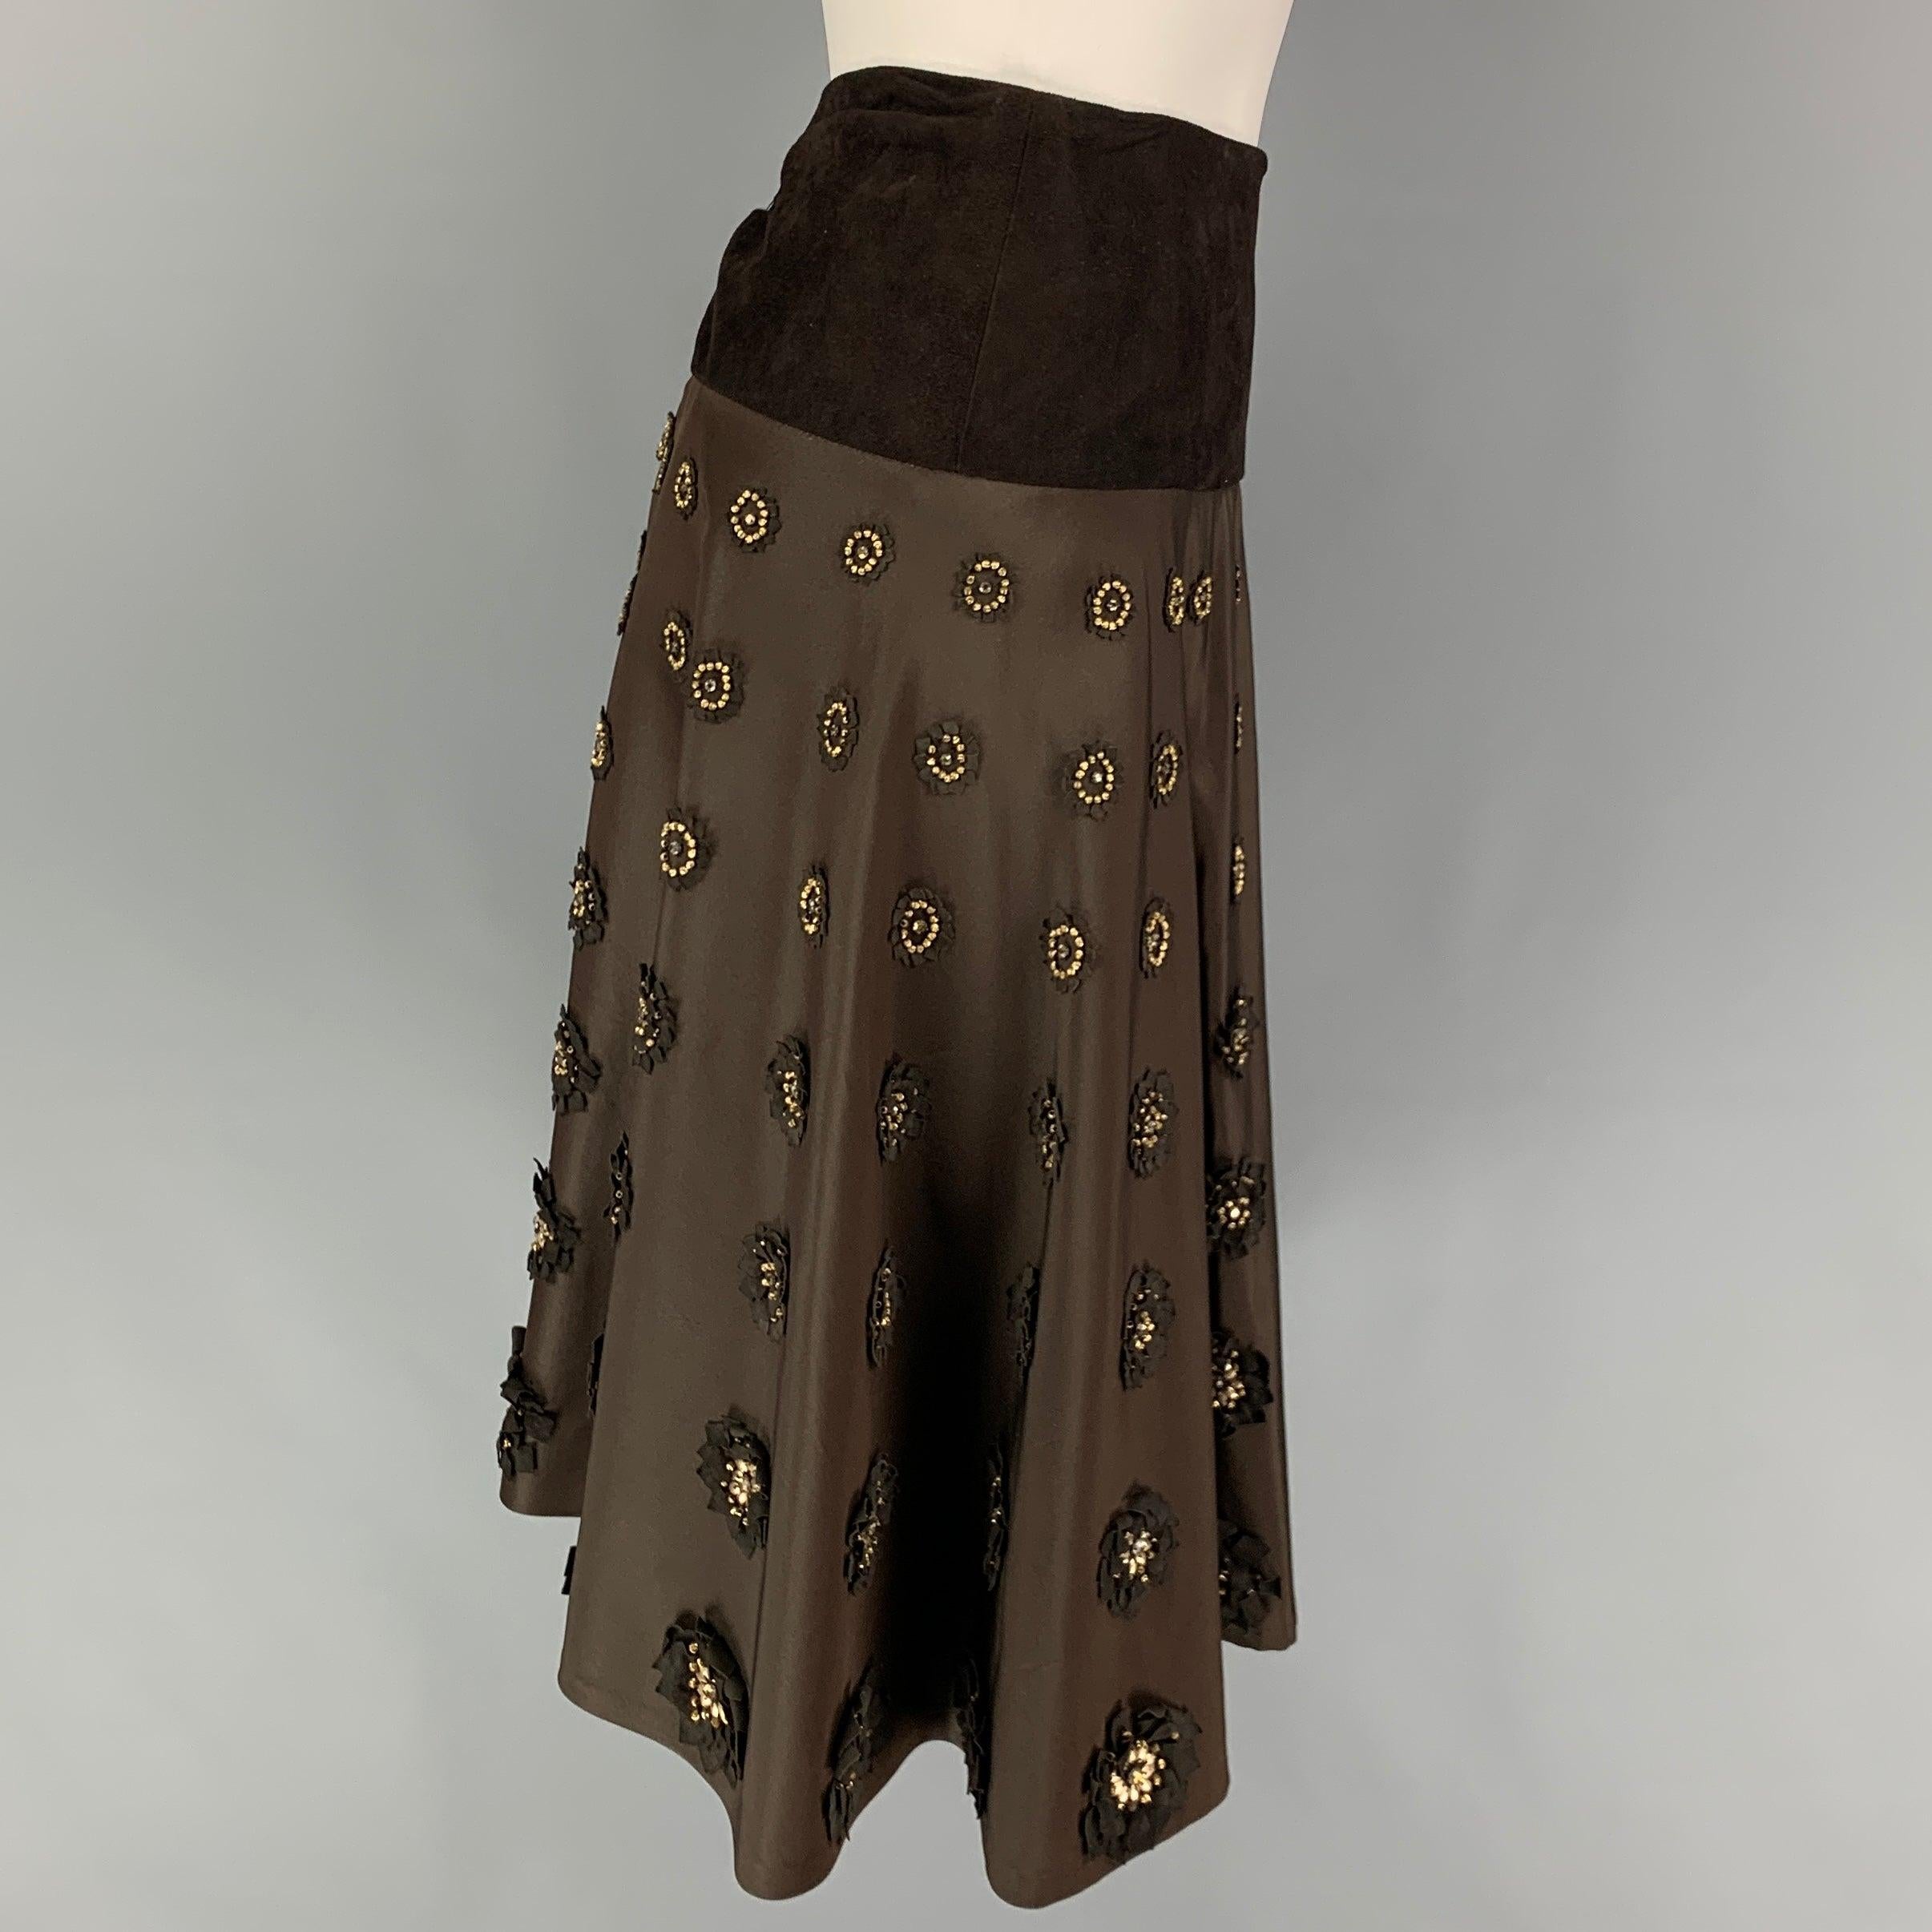 NAEEM KHAN skirt comes in a brown silk with a slip liner featuring a circle style, suede panel, leather beaded floral applique details, and a back zipper closure. Made in USA.
Very Good 
Pre-Owned Condition. 

Marked:   4 

Measurements: 
  Waist: